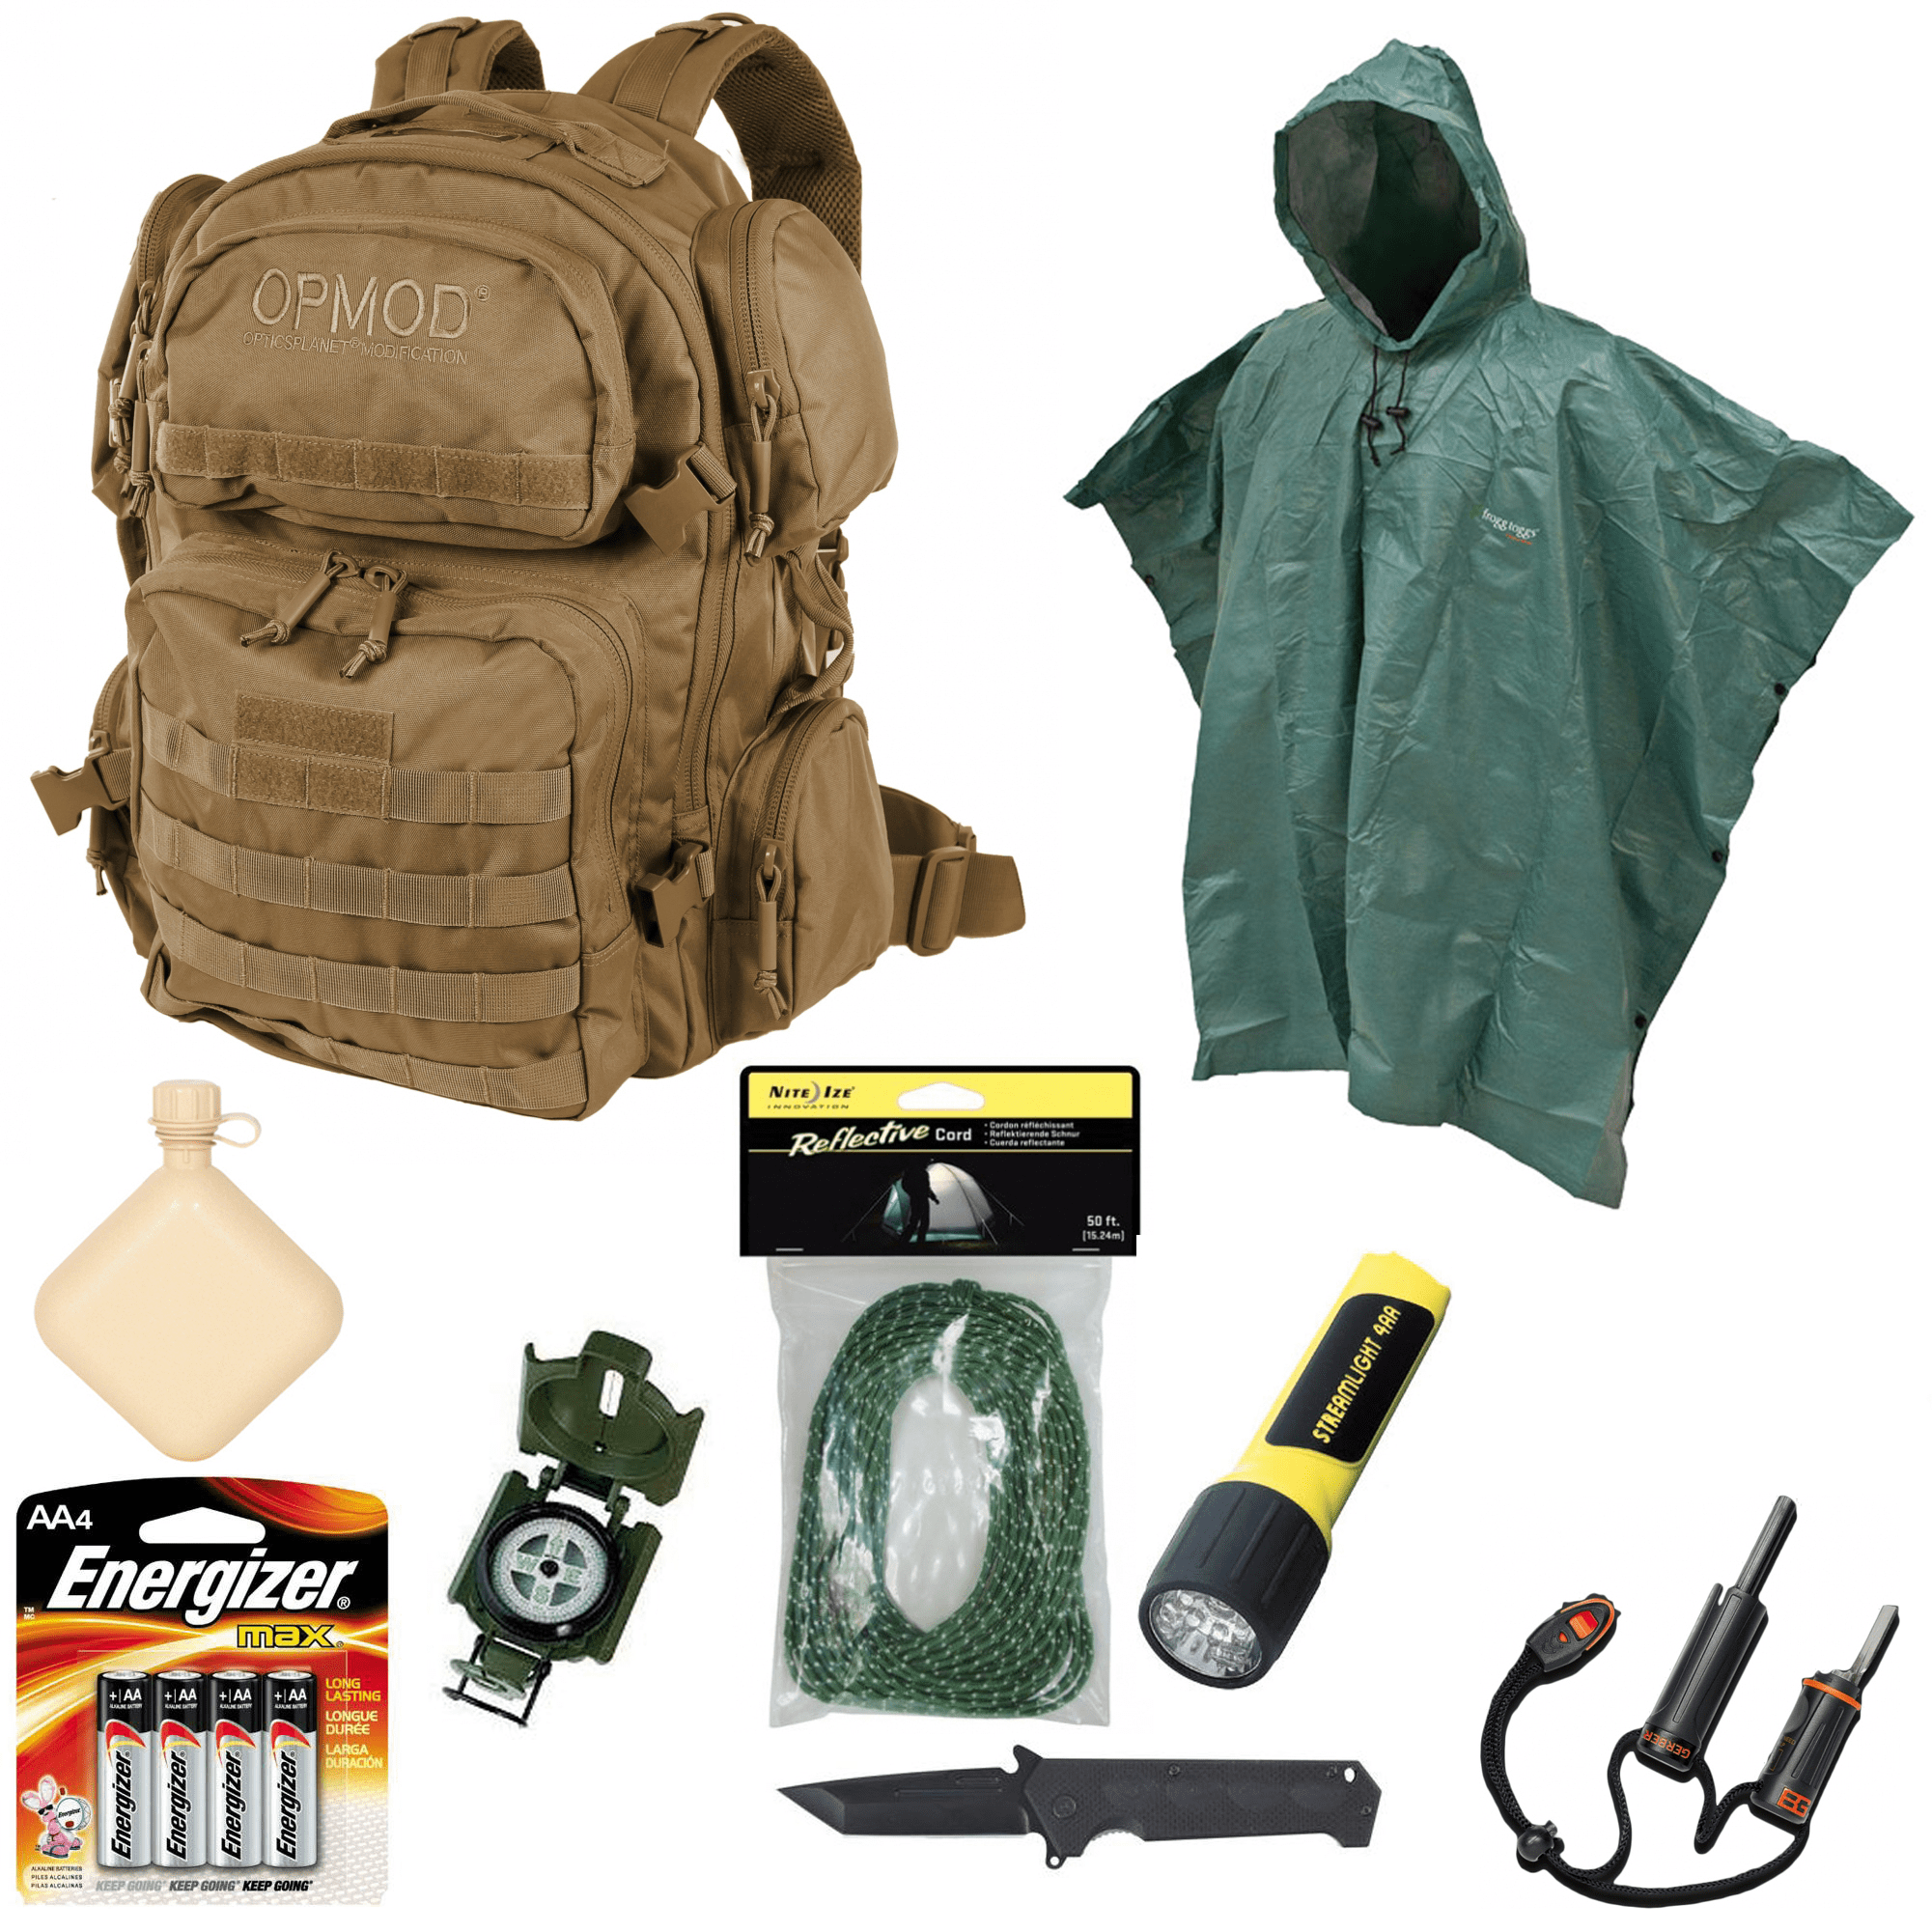 How To Pack A Bug Out Bag